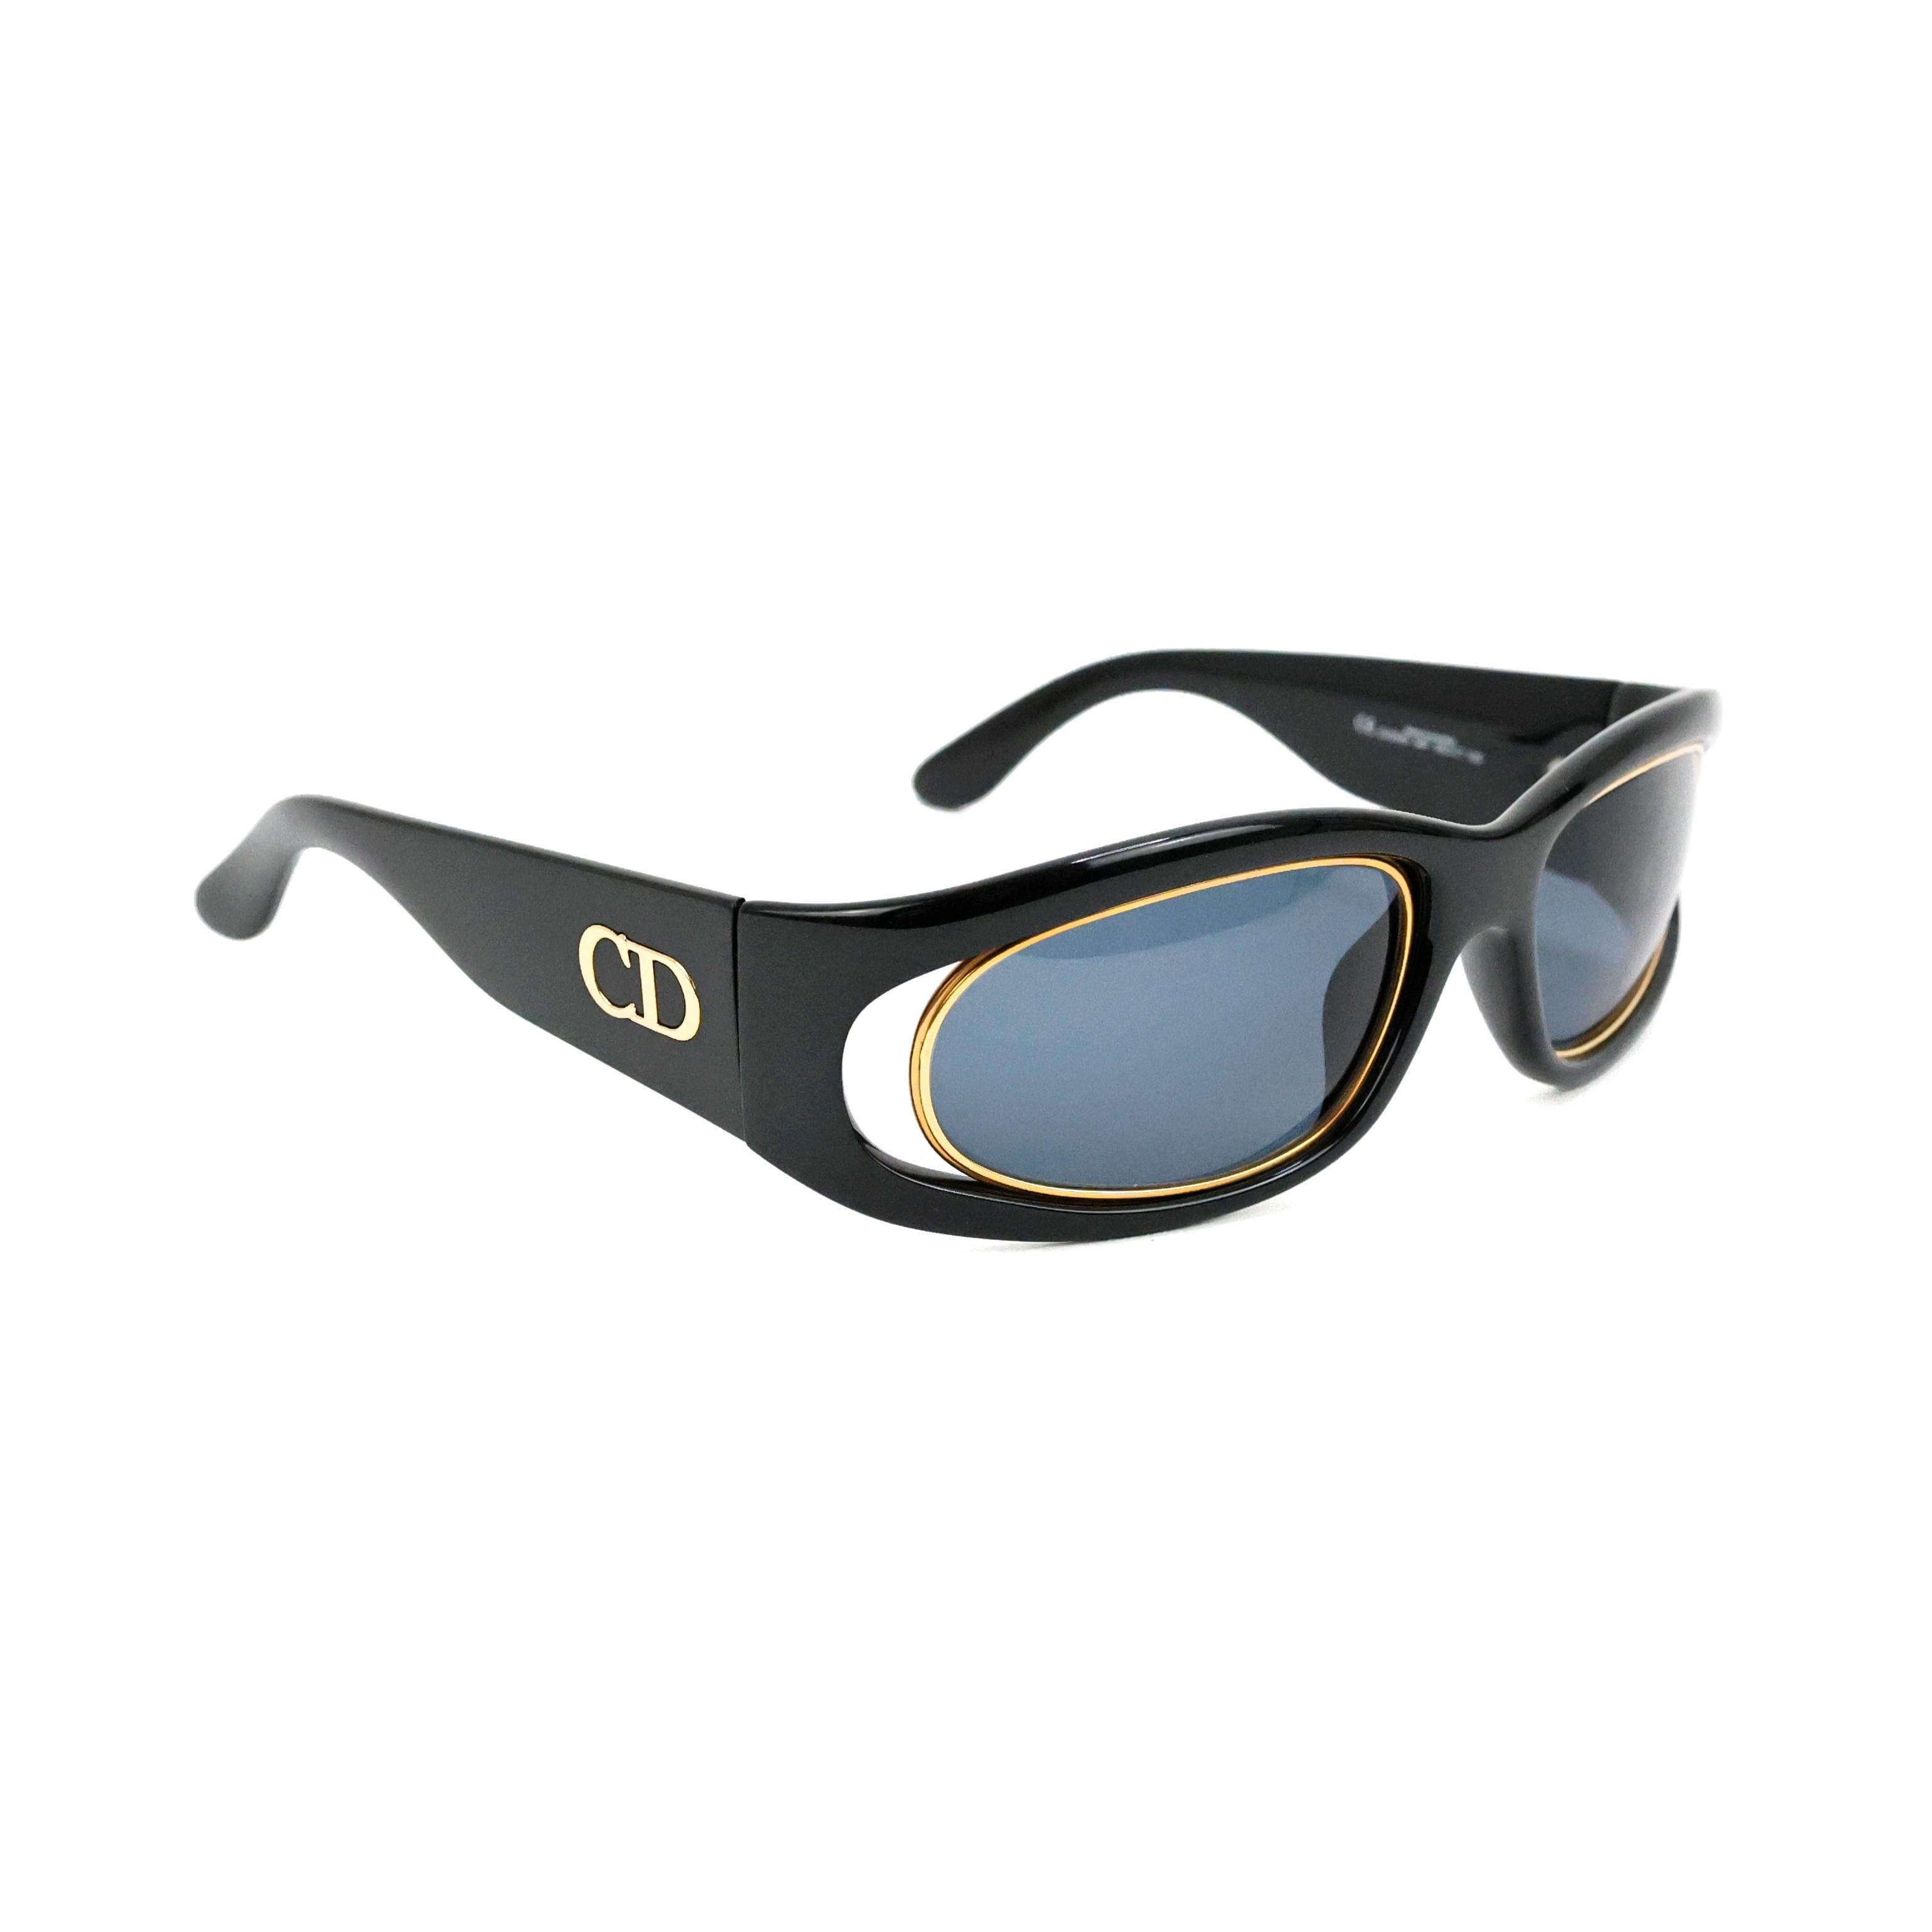 Dior black and gold sunglasses.

Condition:
Really good. To note: slight scratches on lens, not noticeable when worn.